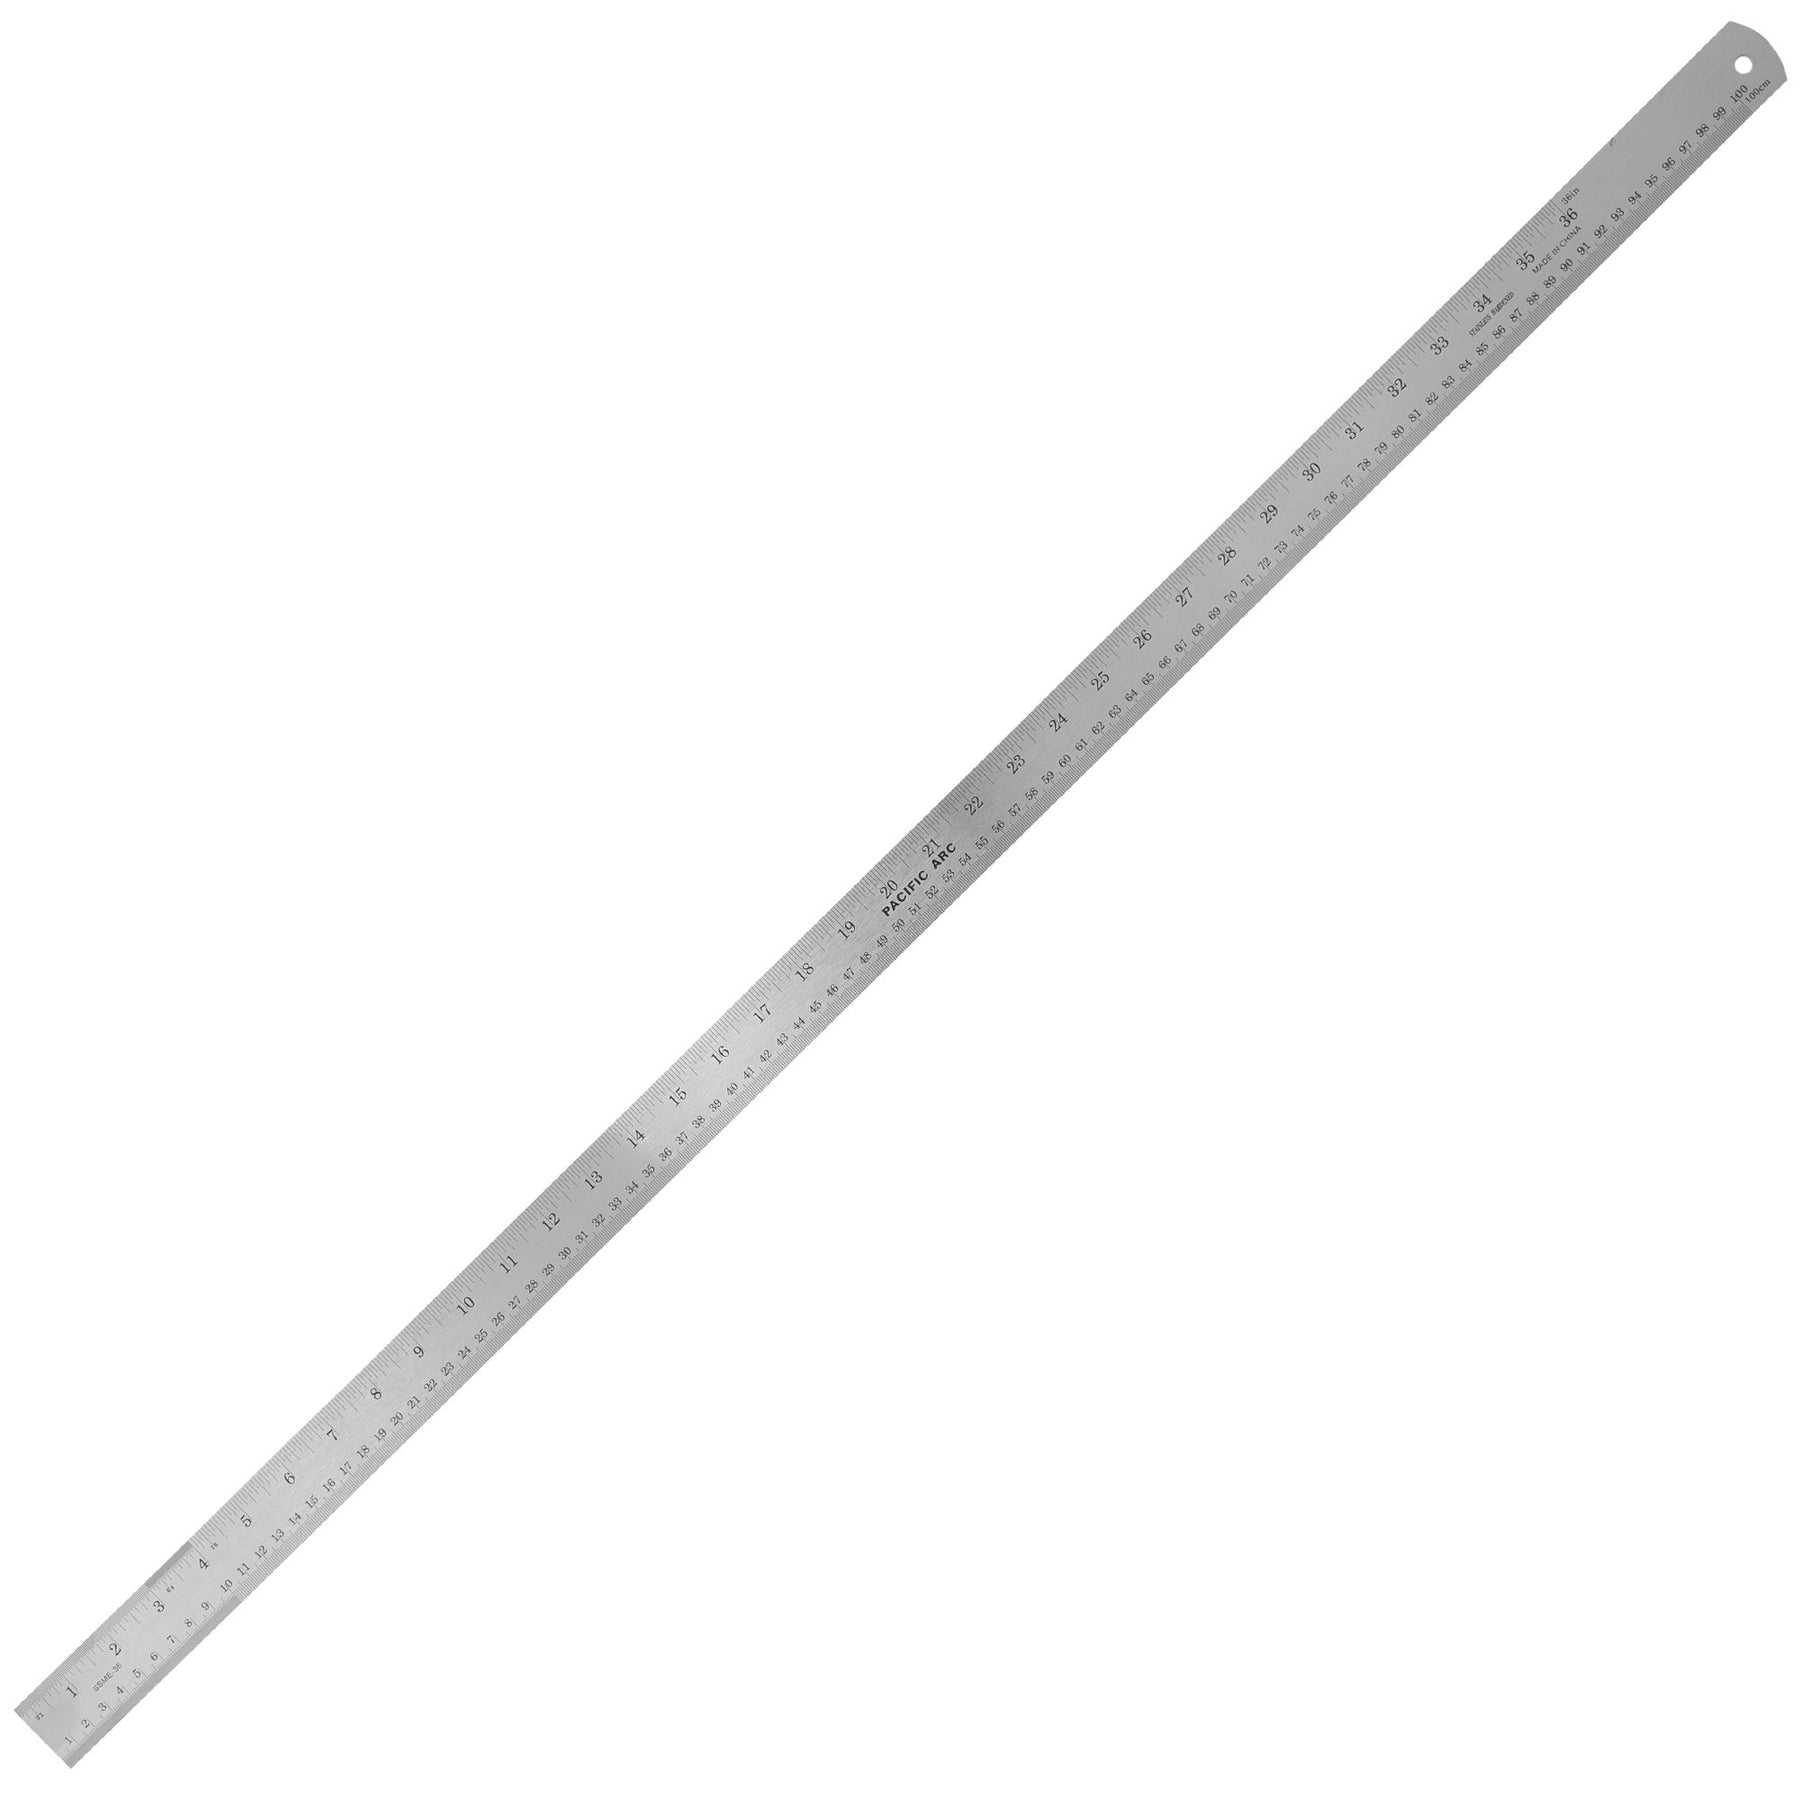 Pacific Arc - Rolling Ruler 6 inches Parallel Rolling Ruler